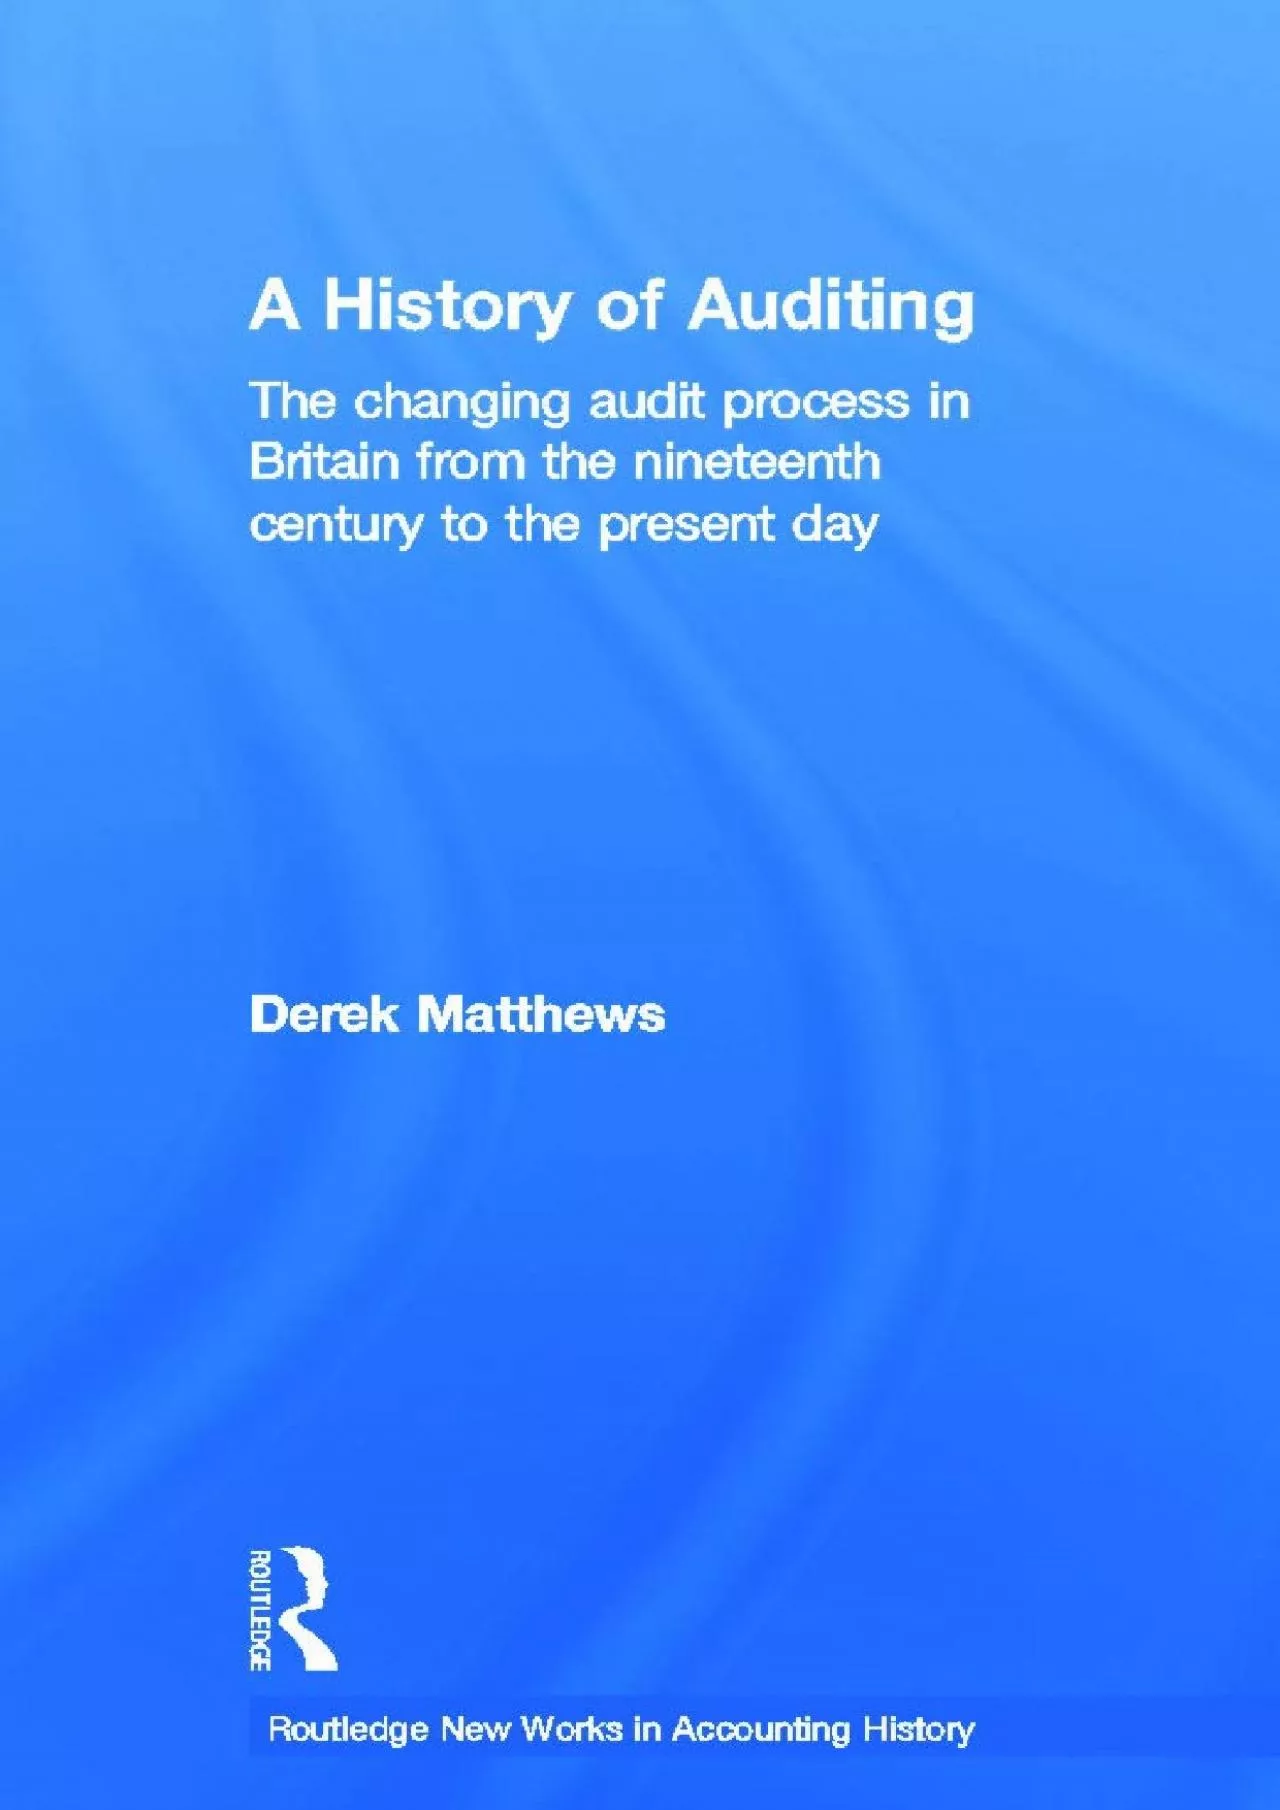 (DOWNLOAD)-A History of Auditing: The Changing Audit Process in Britain from the Nineteenth